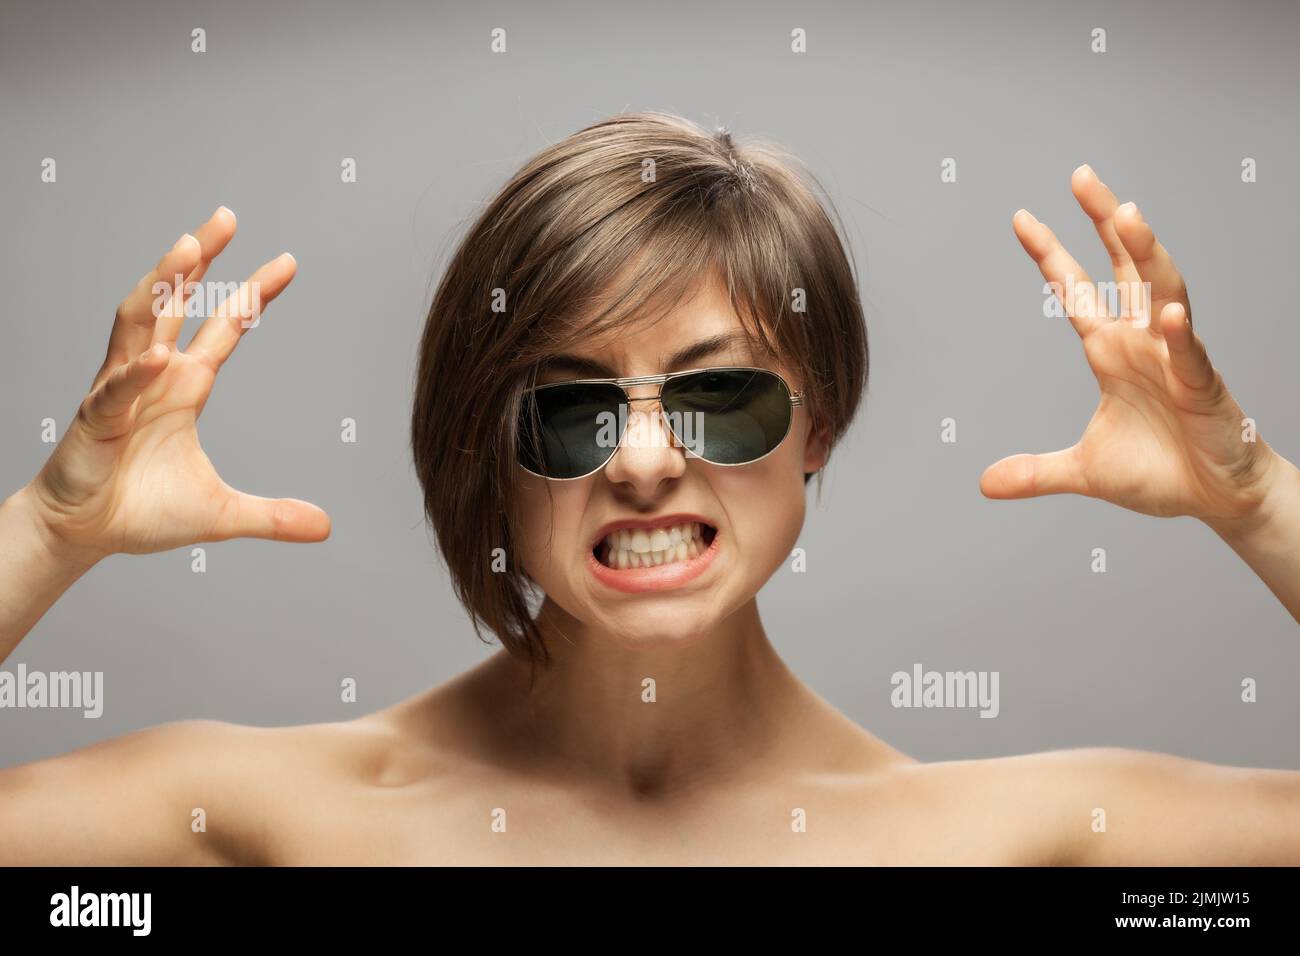 Beautiful girl fashion portrait wearing sunglasses. Surprised angry screaming face expression with hands gesture. Stock Photo